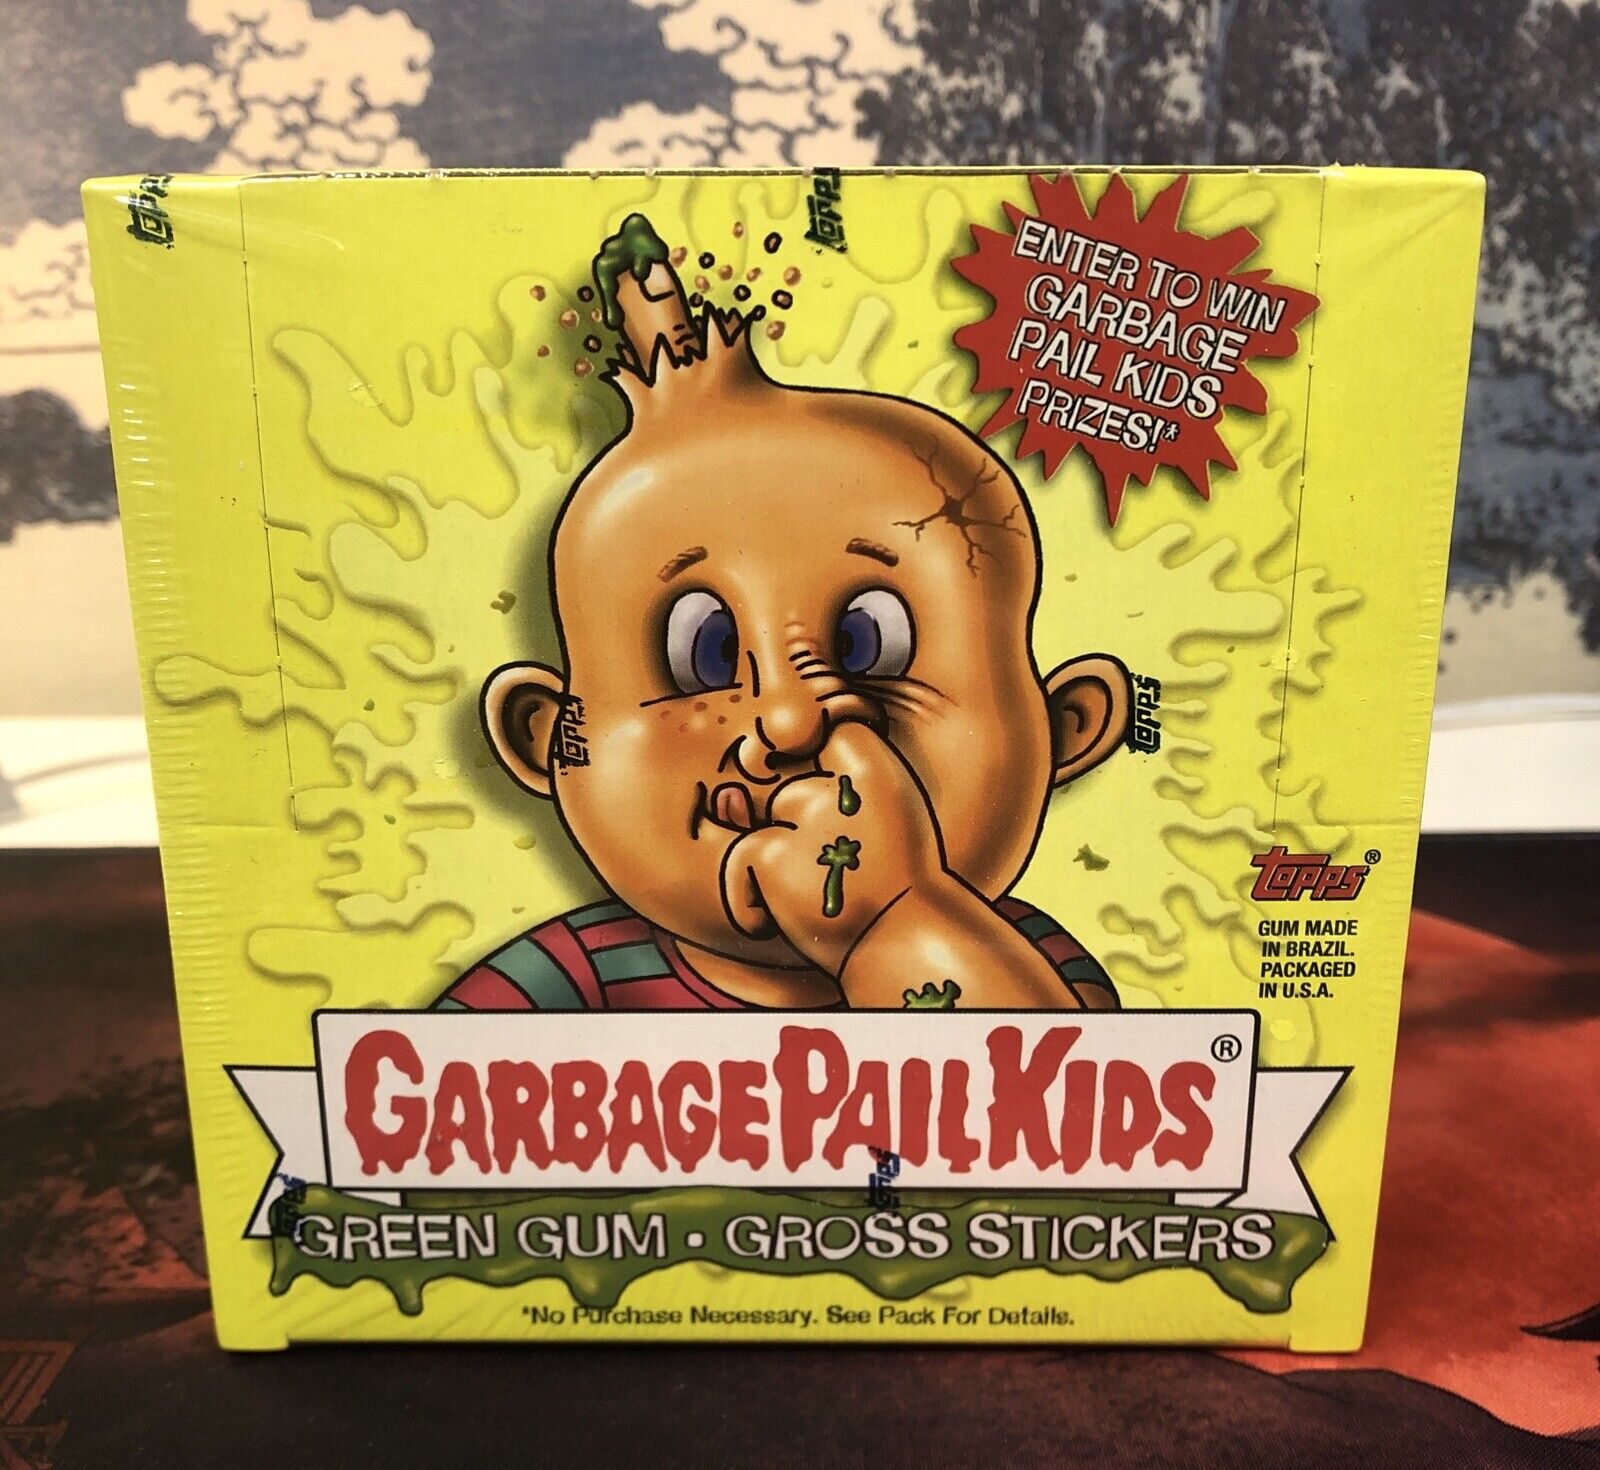 2003 TOPPS GARBAGE PAIL KIDS FACTORY SEALED BOX WITH GREEN GUM GROSS STICKERS